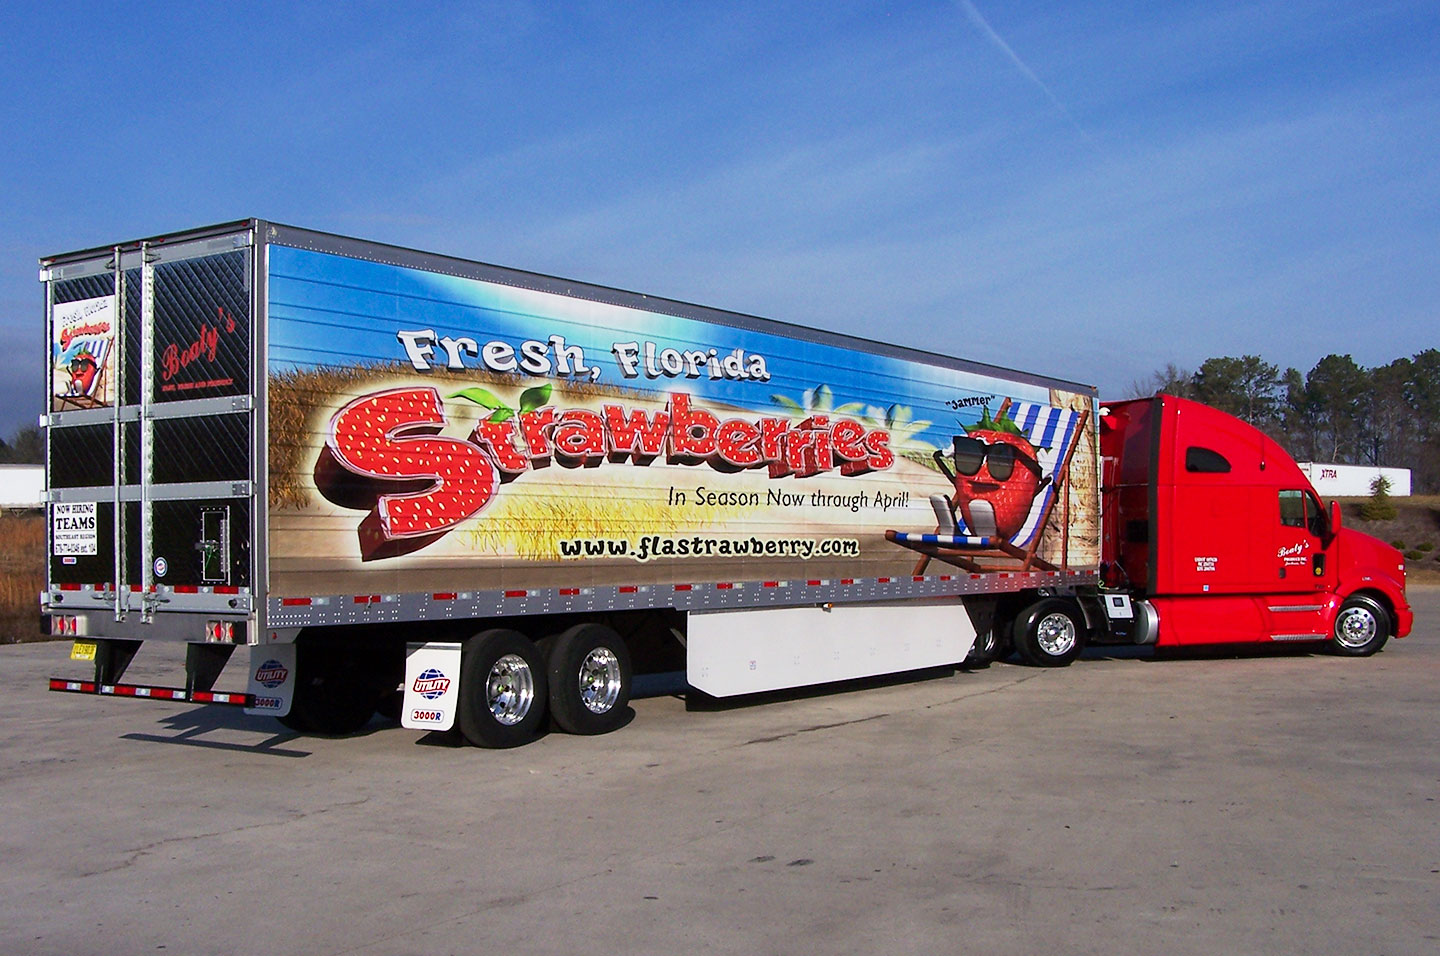 Florida Strawberry Growers Association's very own Jammer Truck